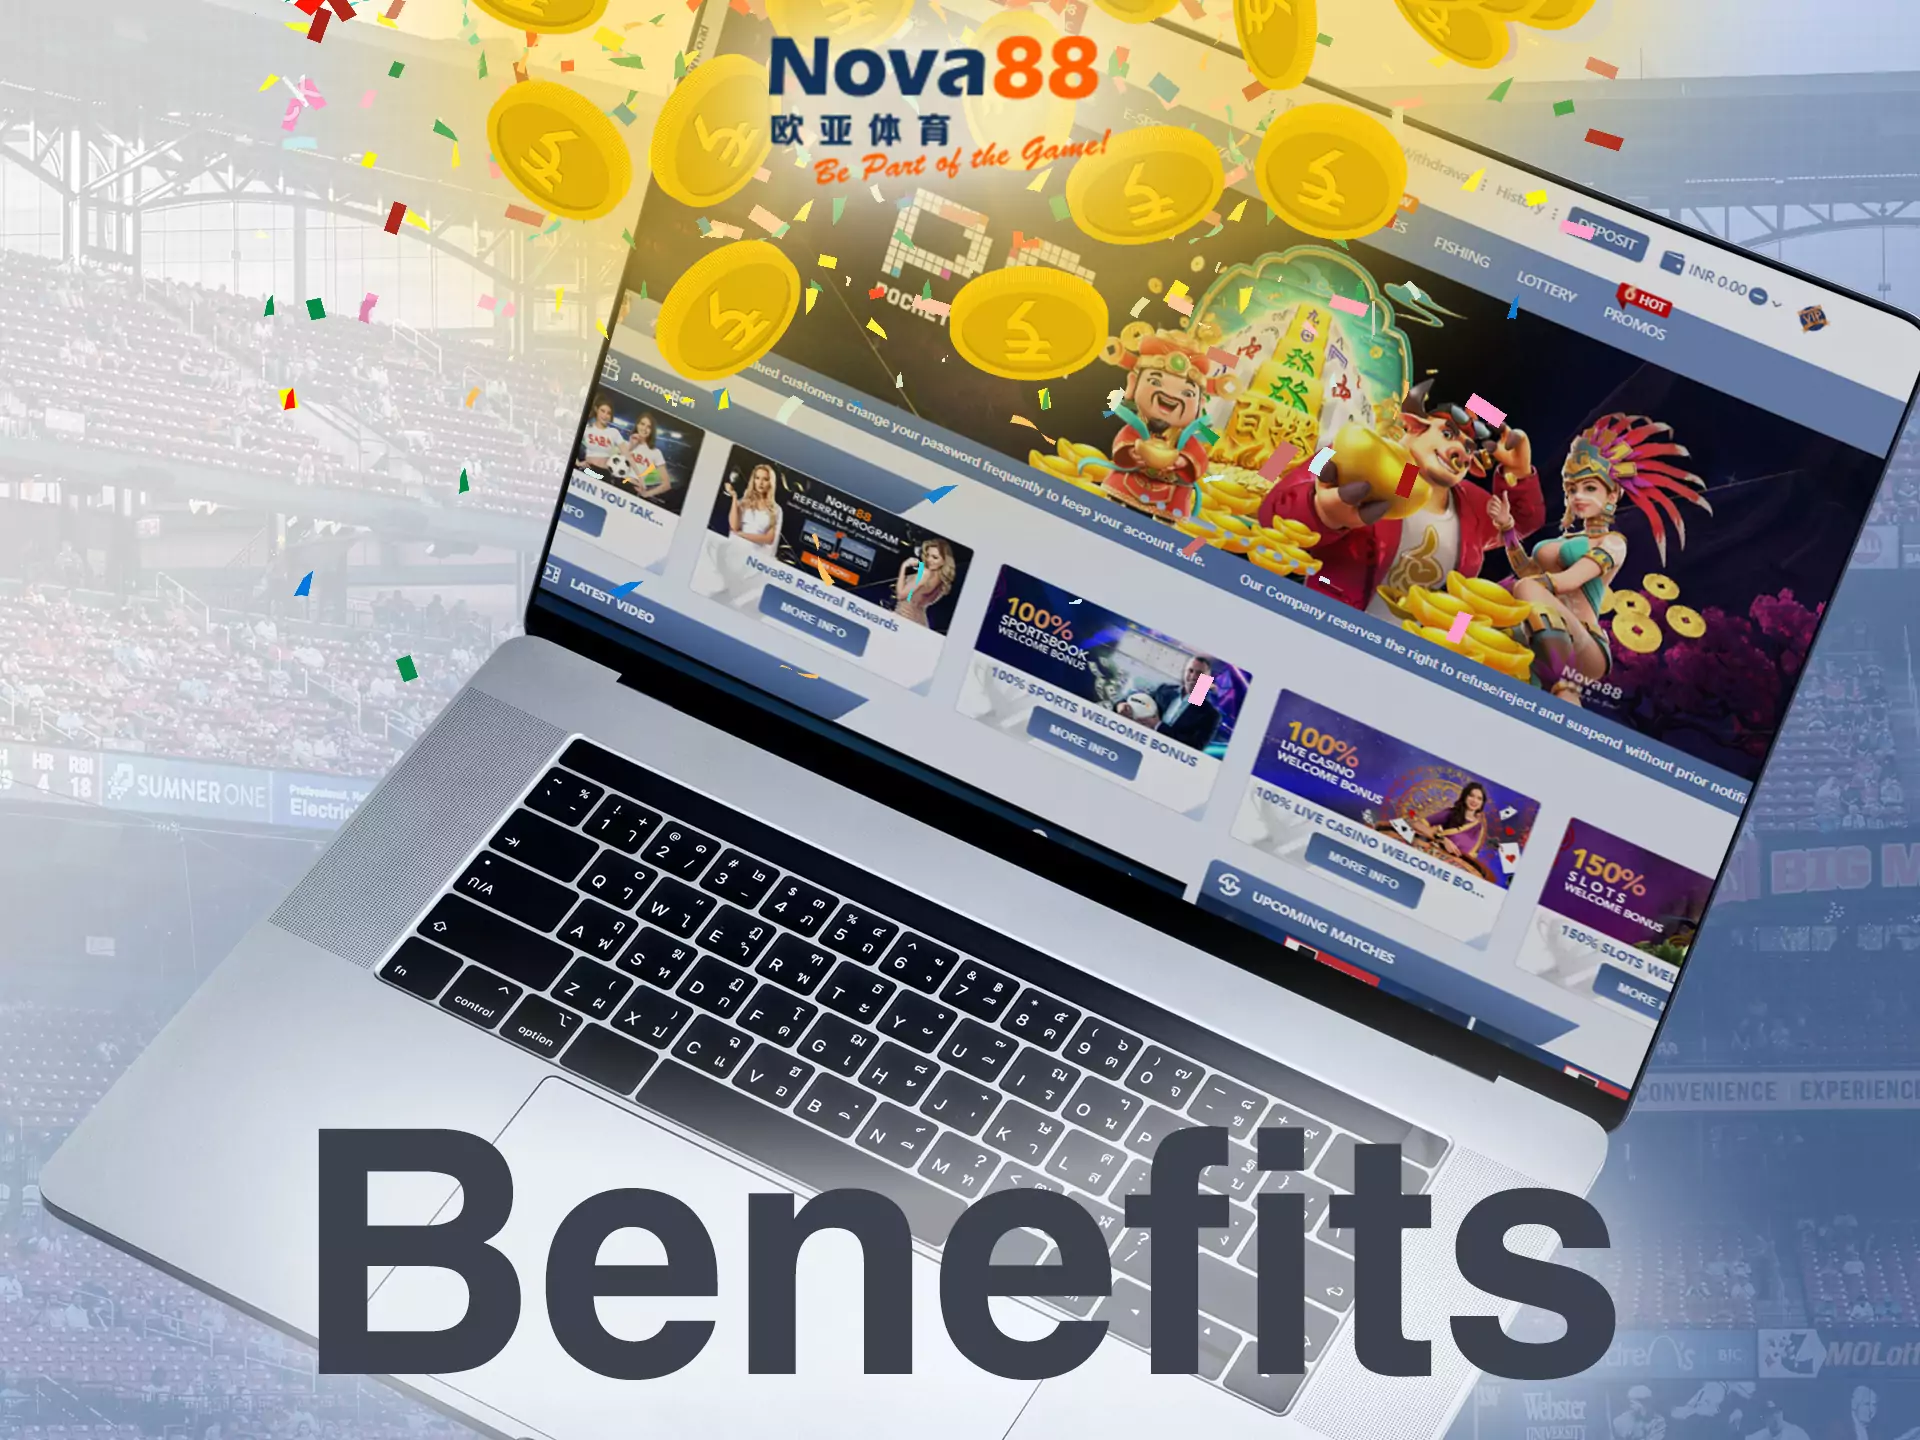 Nova88 is a great site providing both sports betting and casino games.